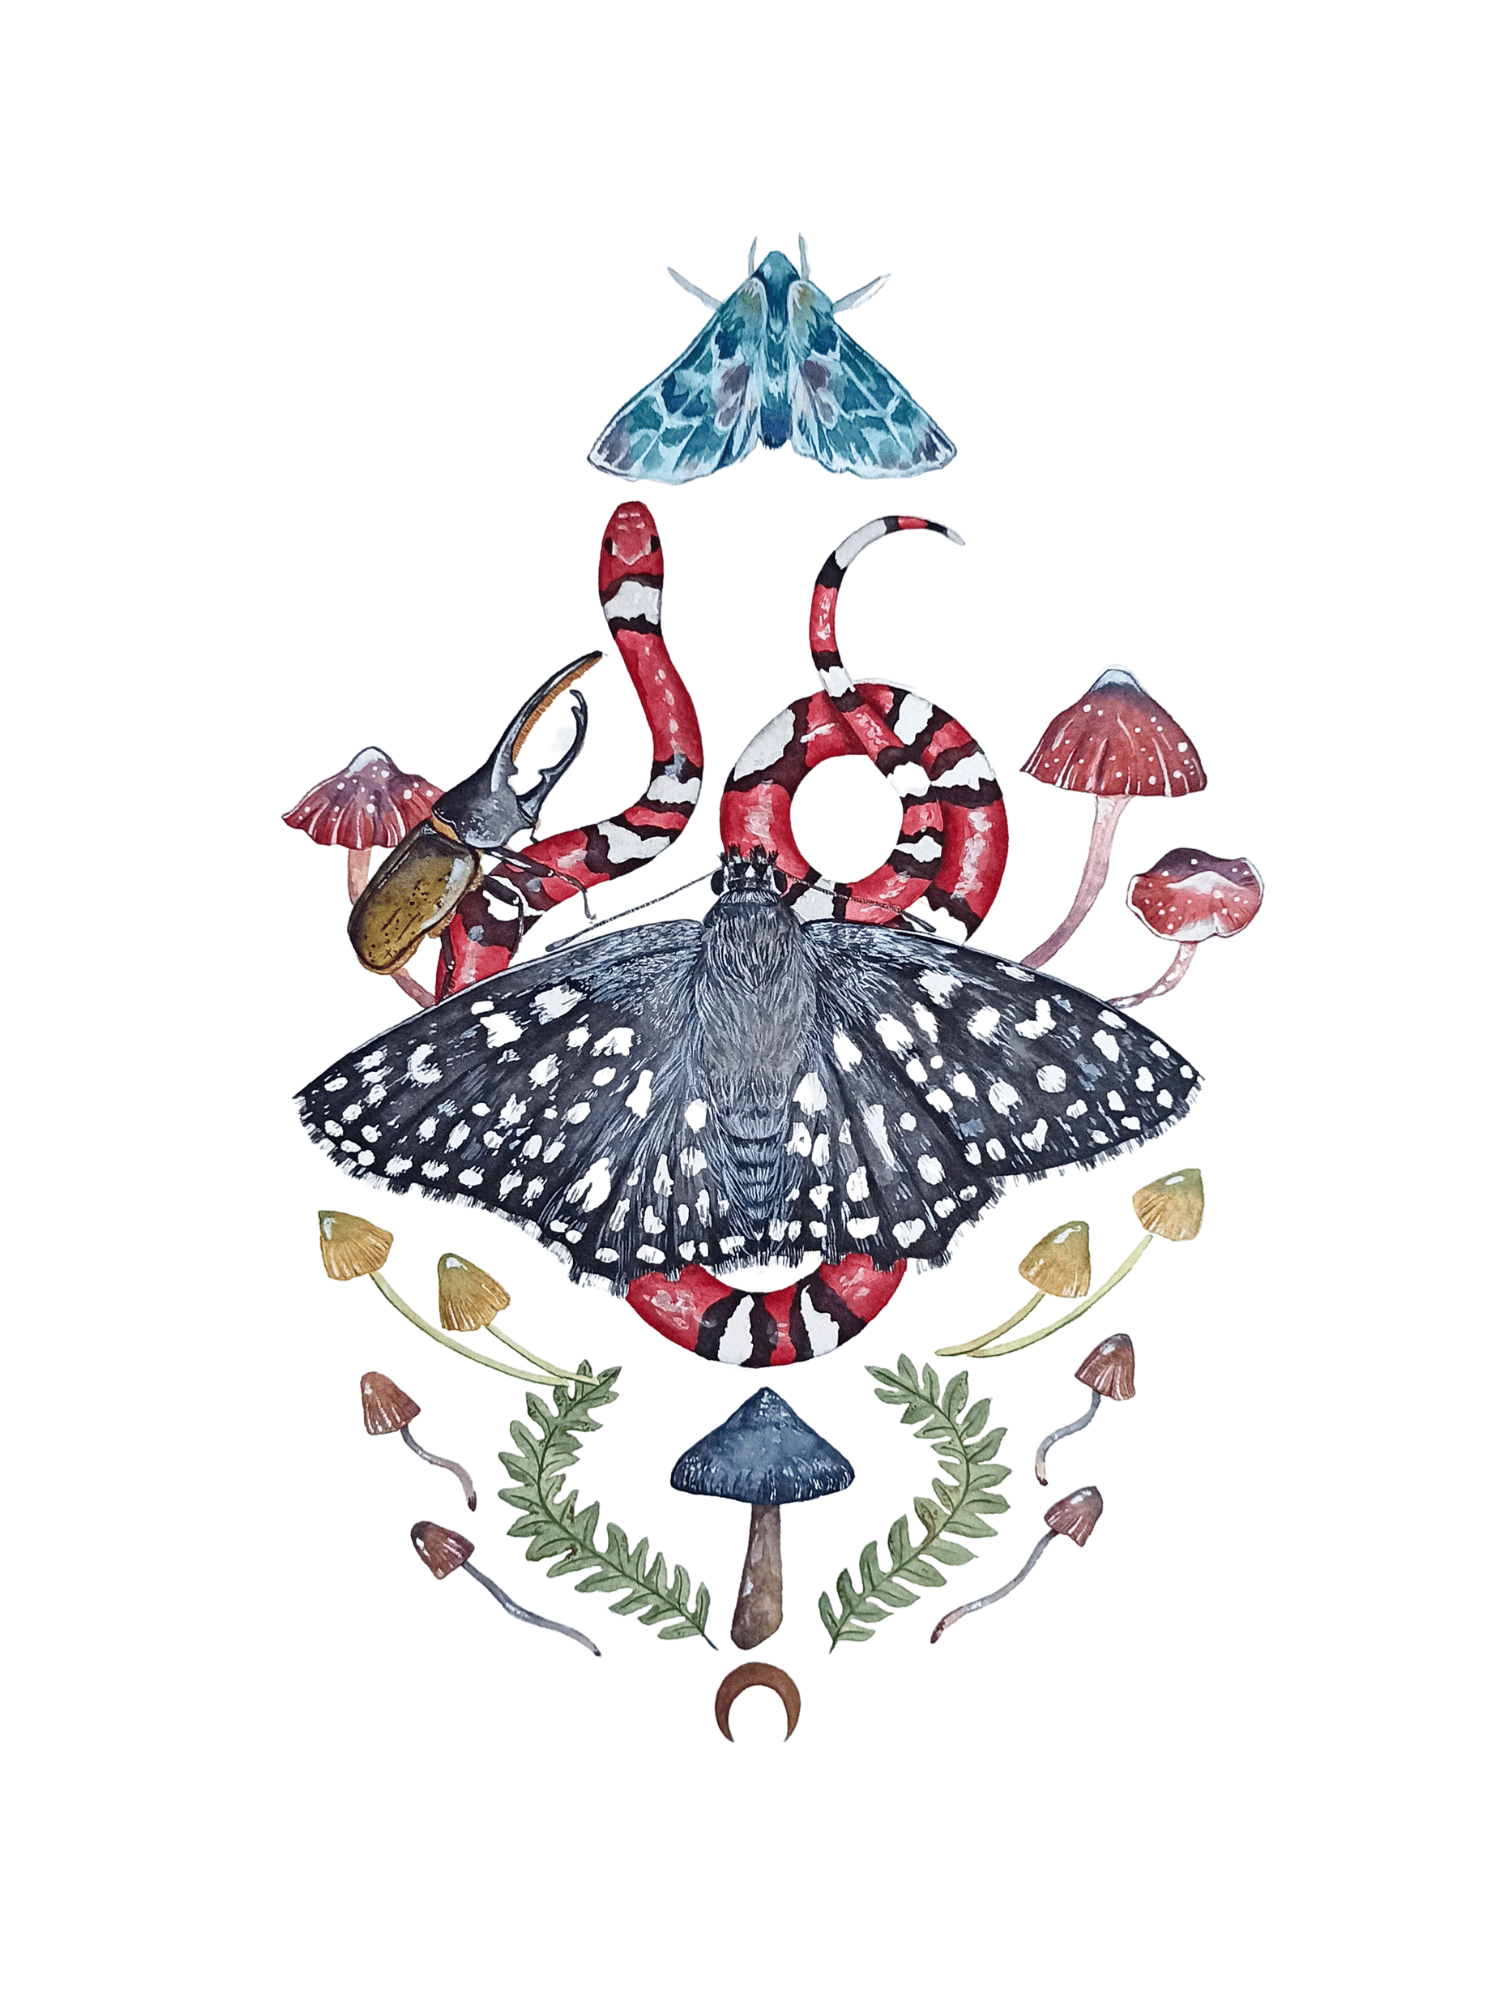 Image of Moths & Snake Guides of the nighttime realm Watercolor Illustration PRINT 